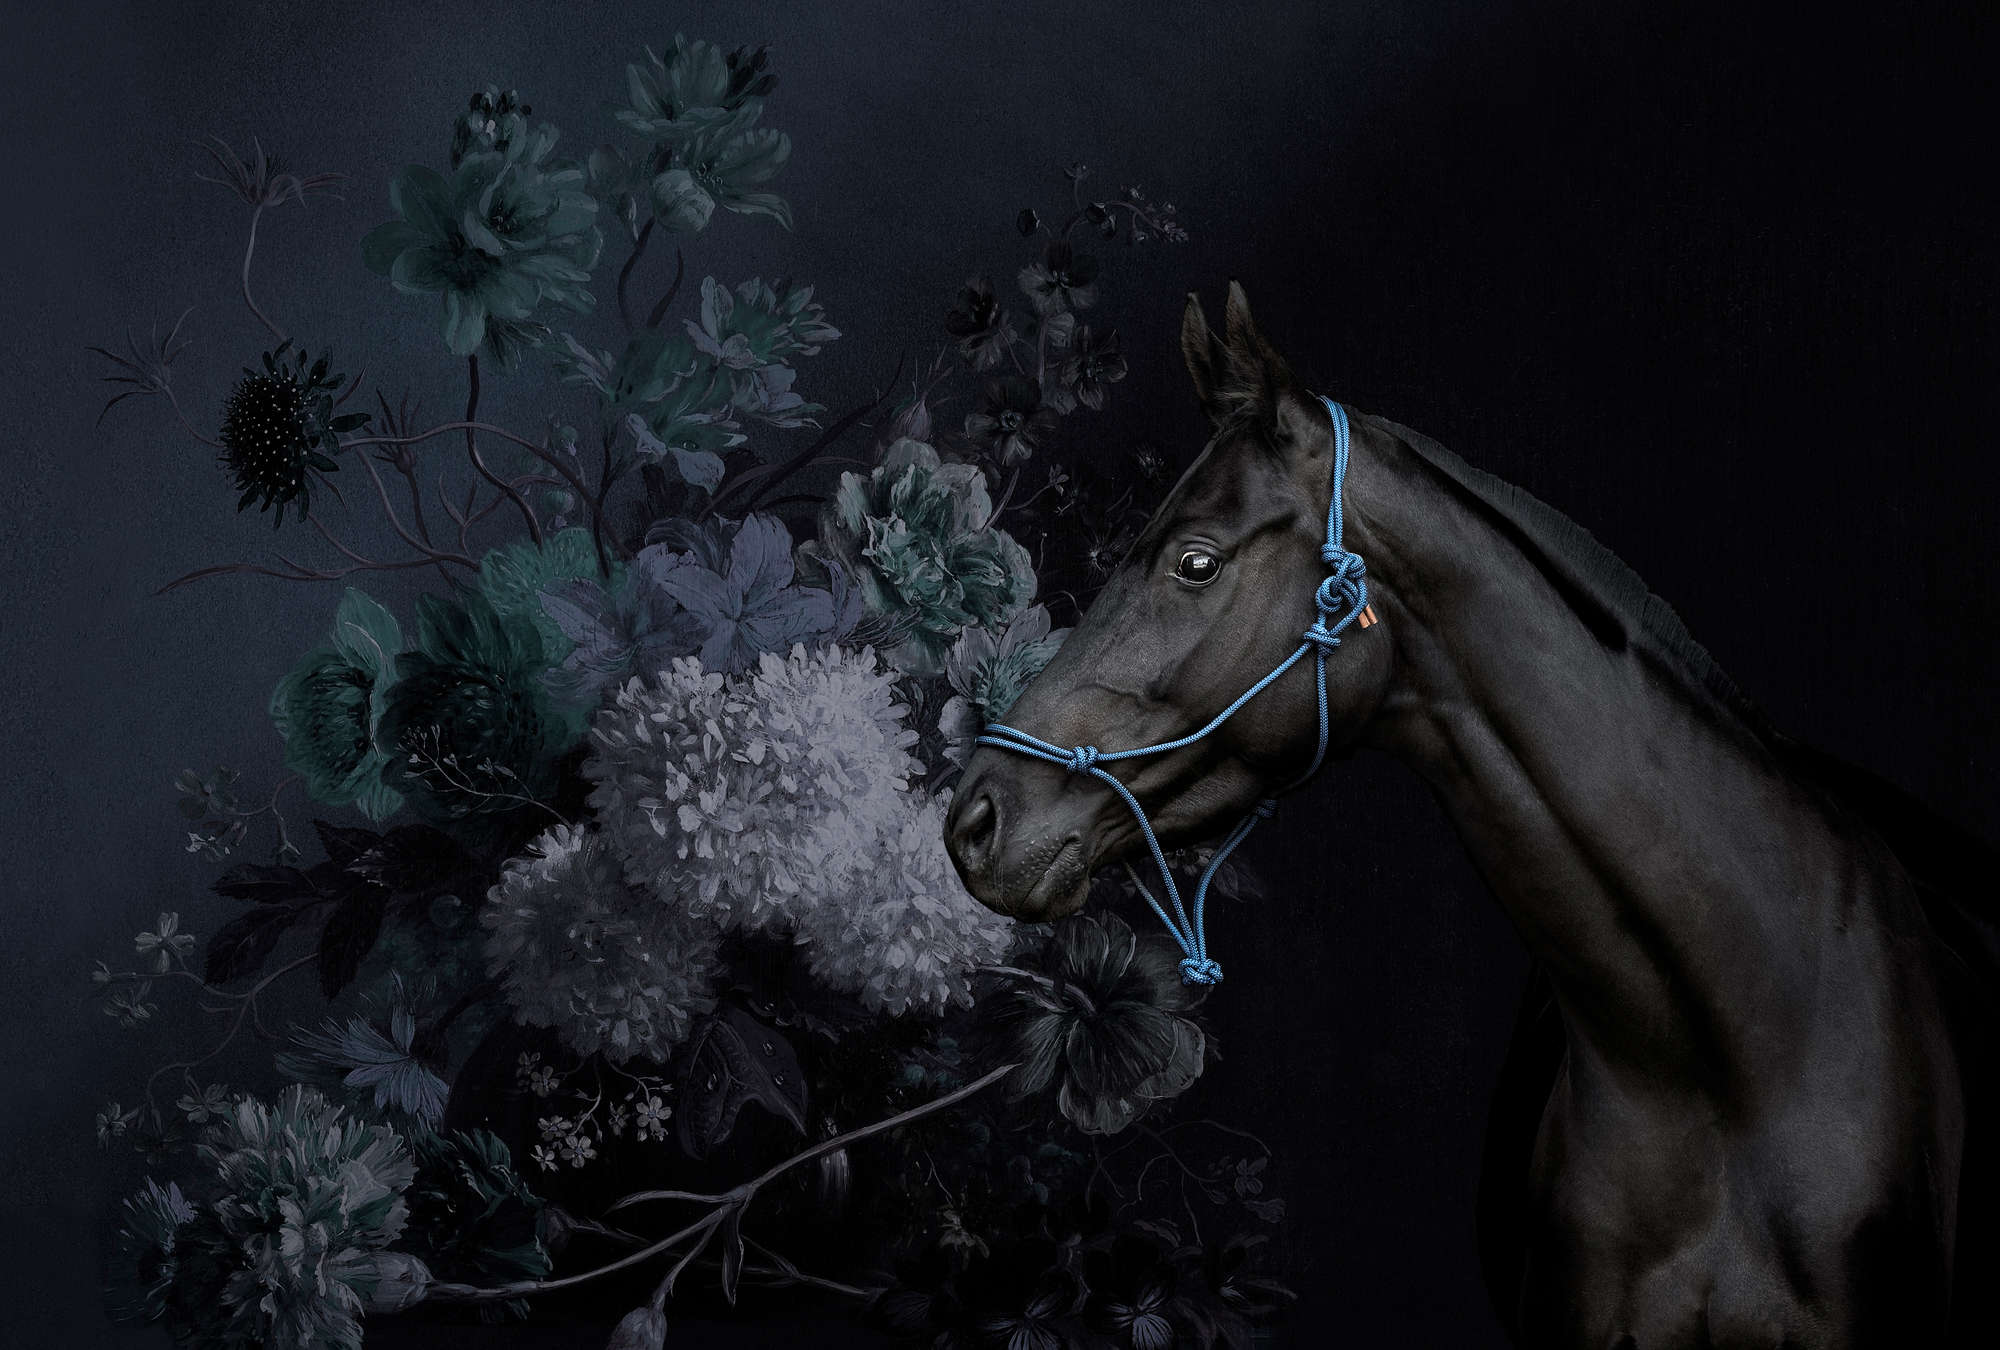             Horses portrait style mural with flowers
        